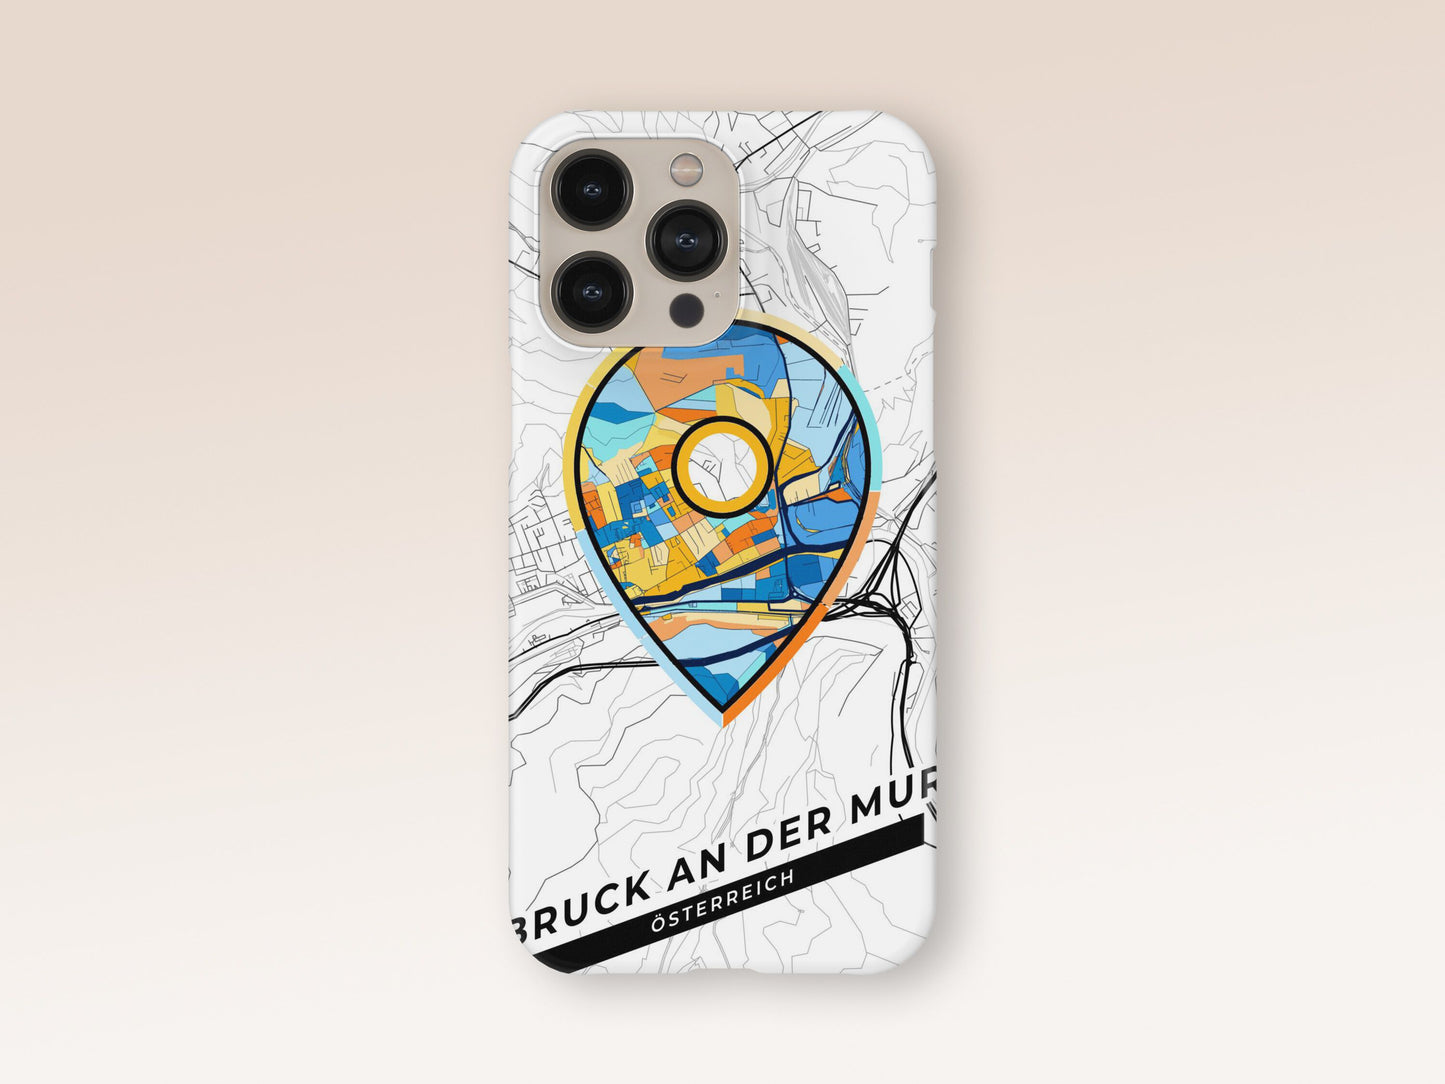 Bruck An Der Mur Österreich slim phone case with colorful icon. Birthday, wedding or housewarming gift. Couple match cases. 1